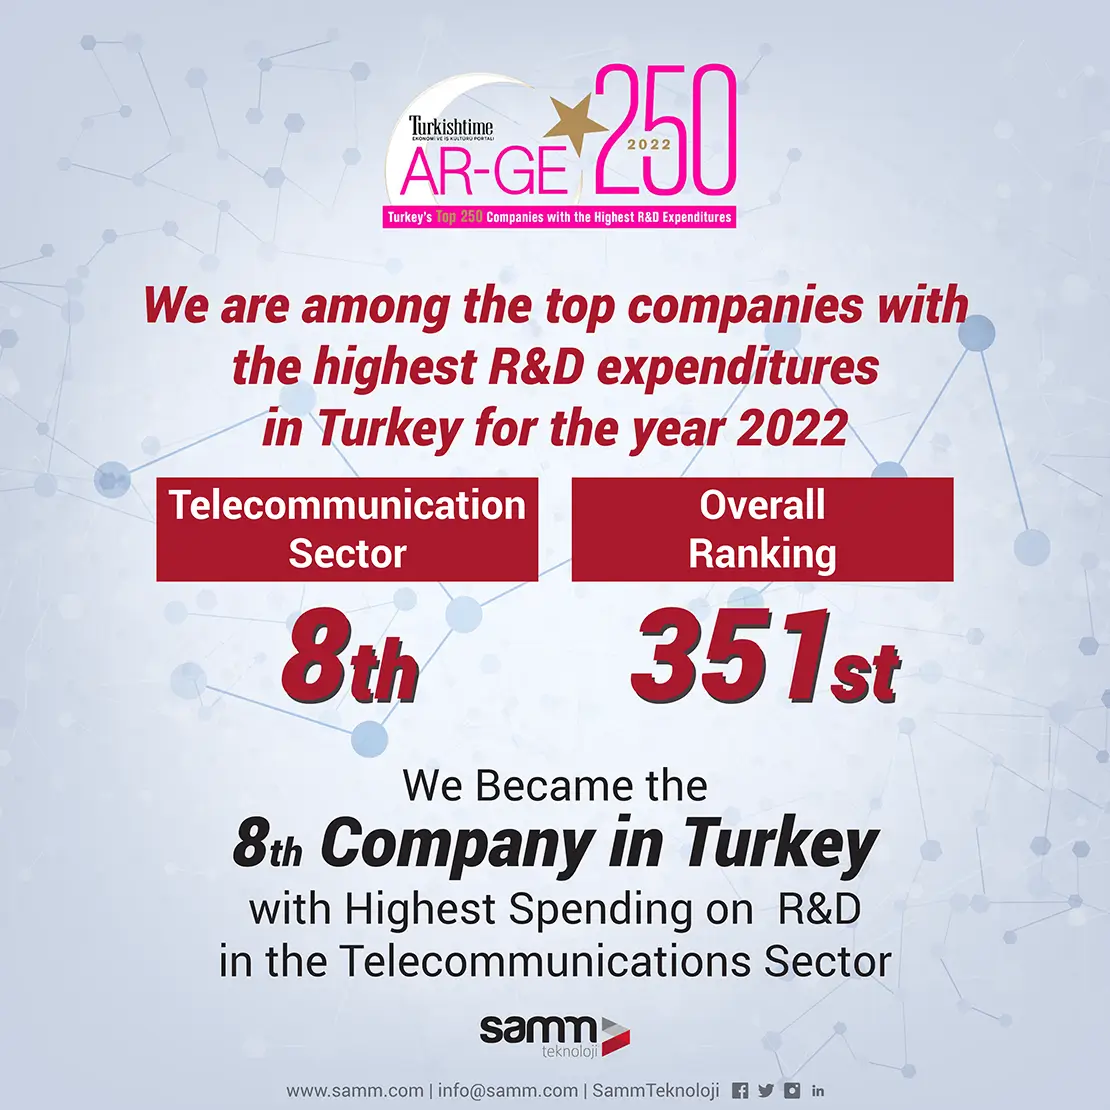 Samm Teknoloji is Among the Top 10 Companies in Telecommunication Sector R&D Investments!